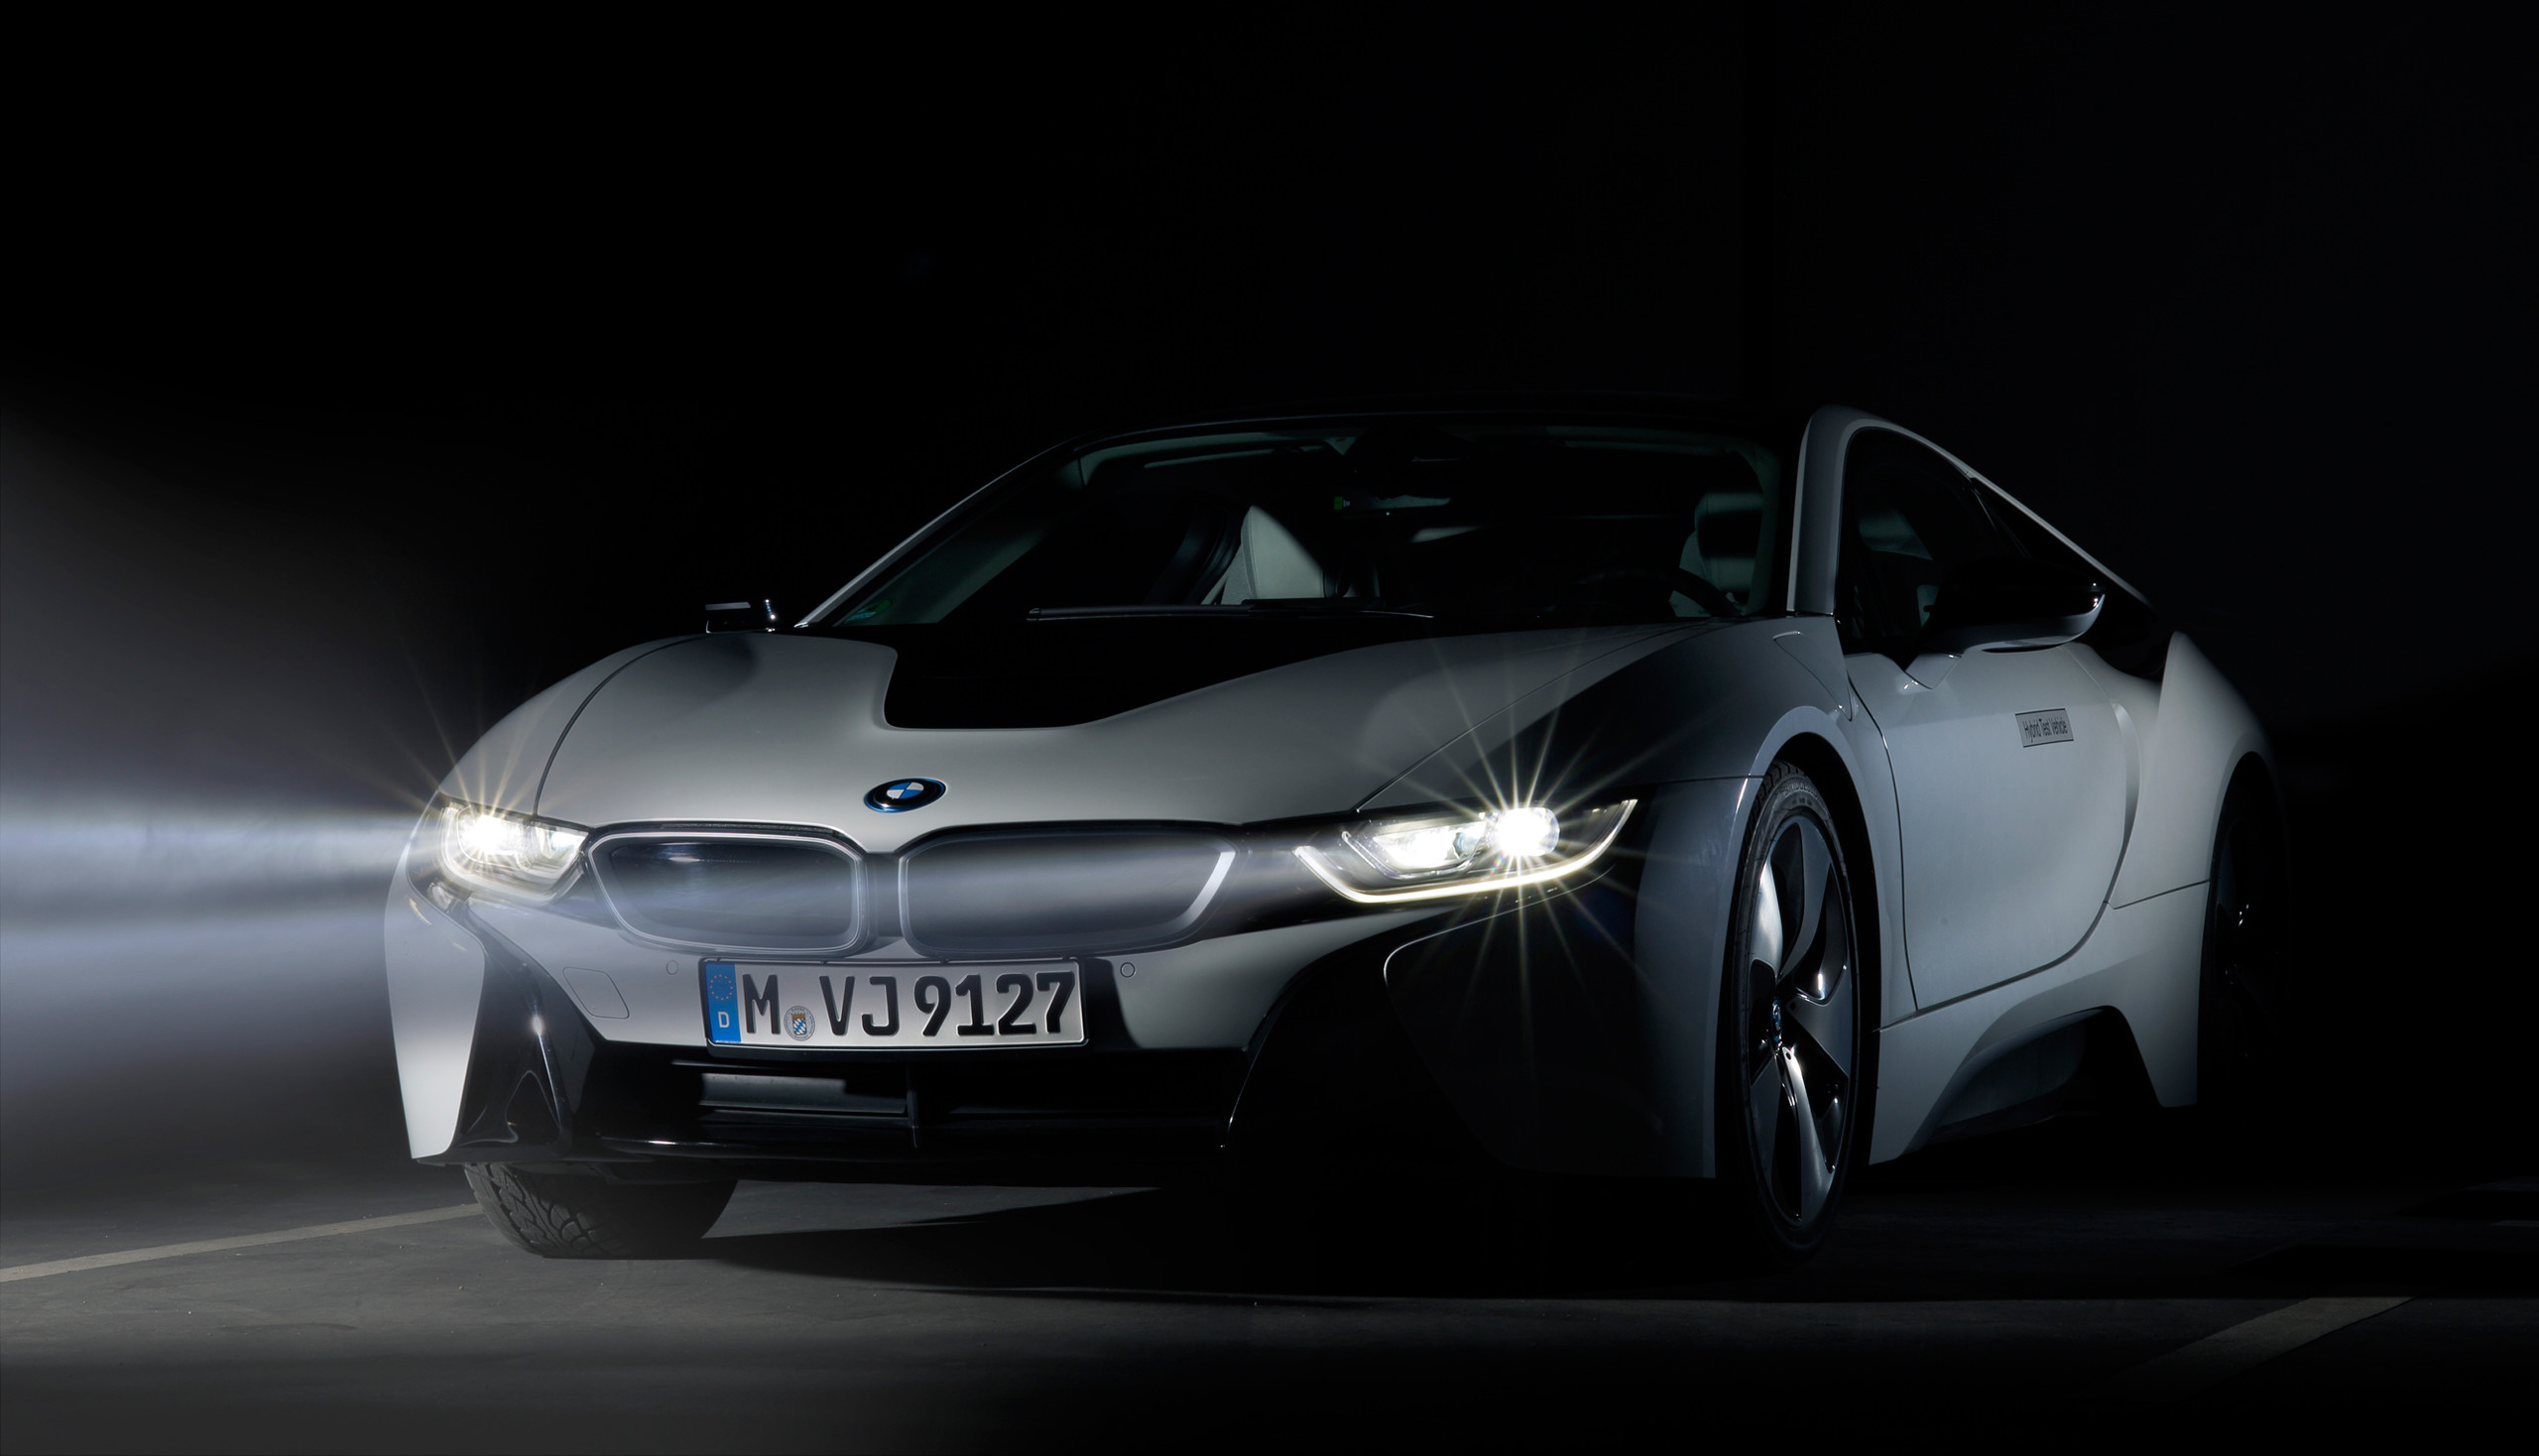 2560x1468 Bmw I8 Wallpapers HD.